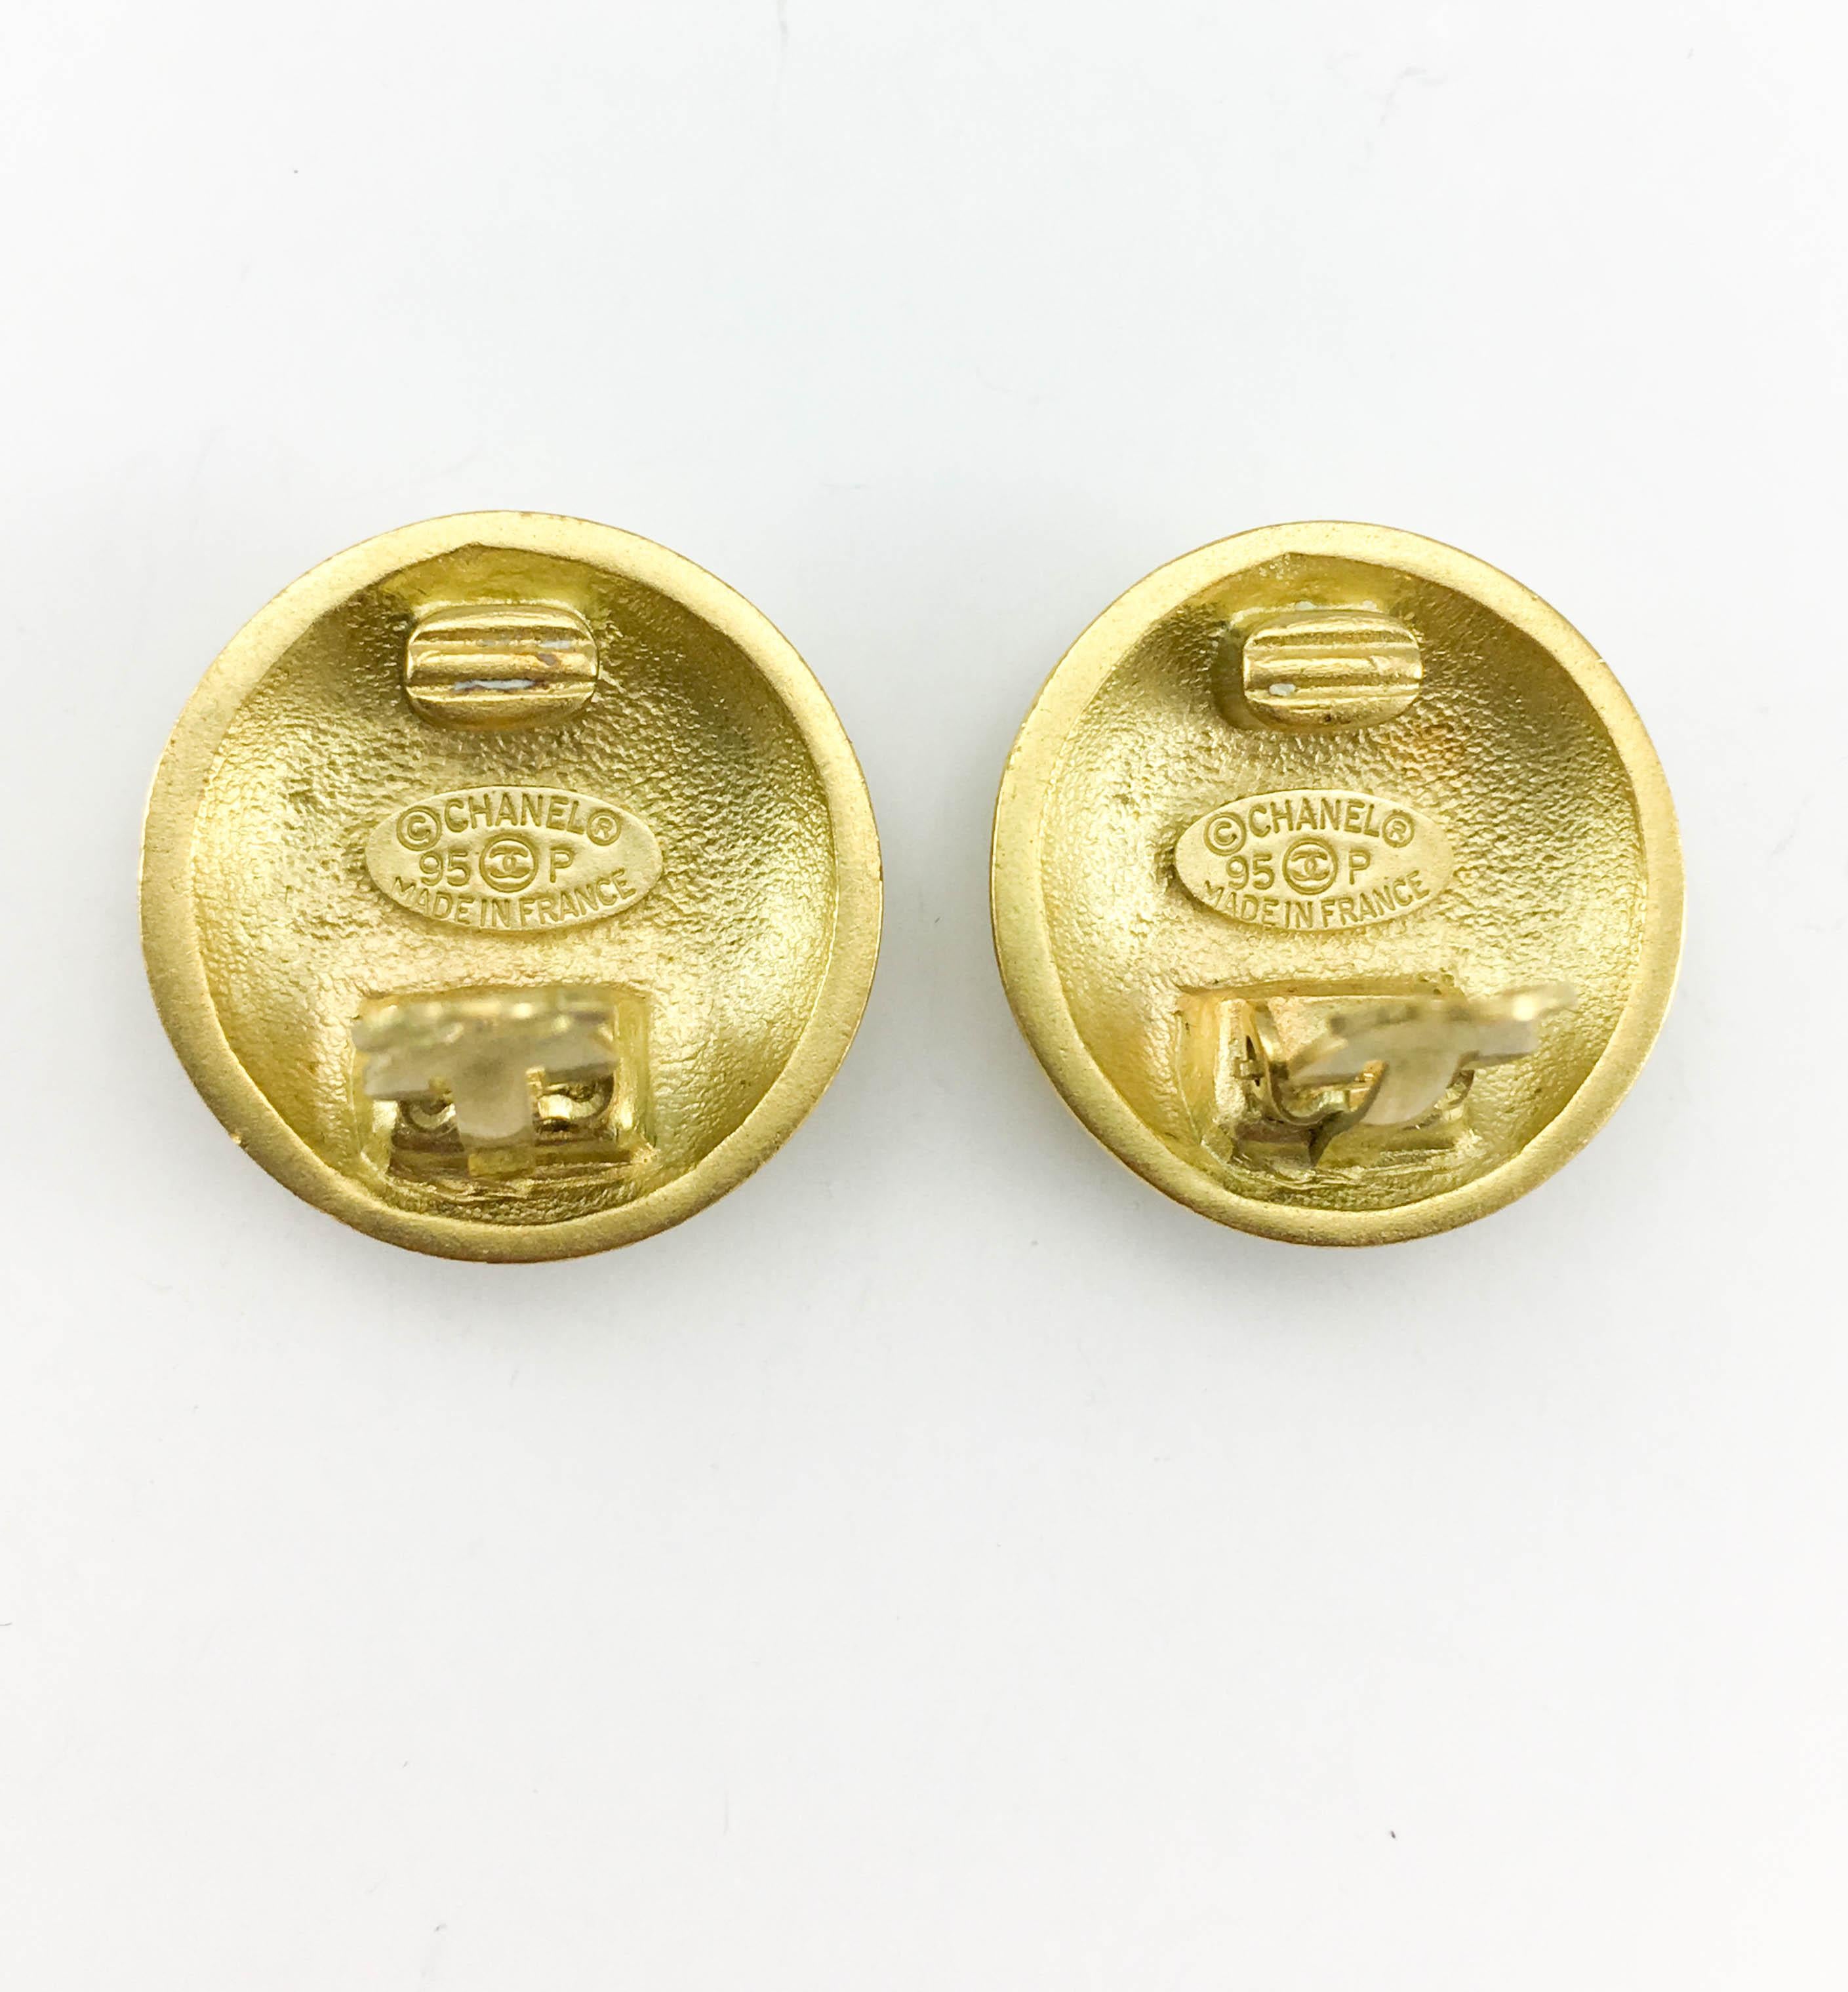 1995 Chanel Matte Gold-Plated Round Logo Earrings 3